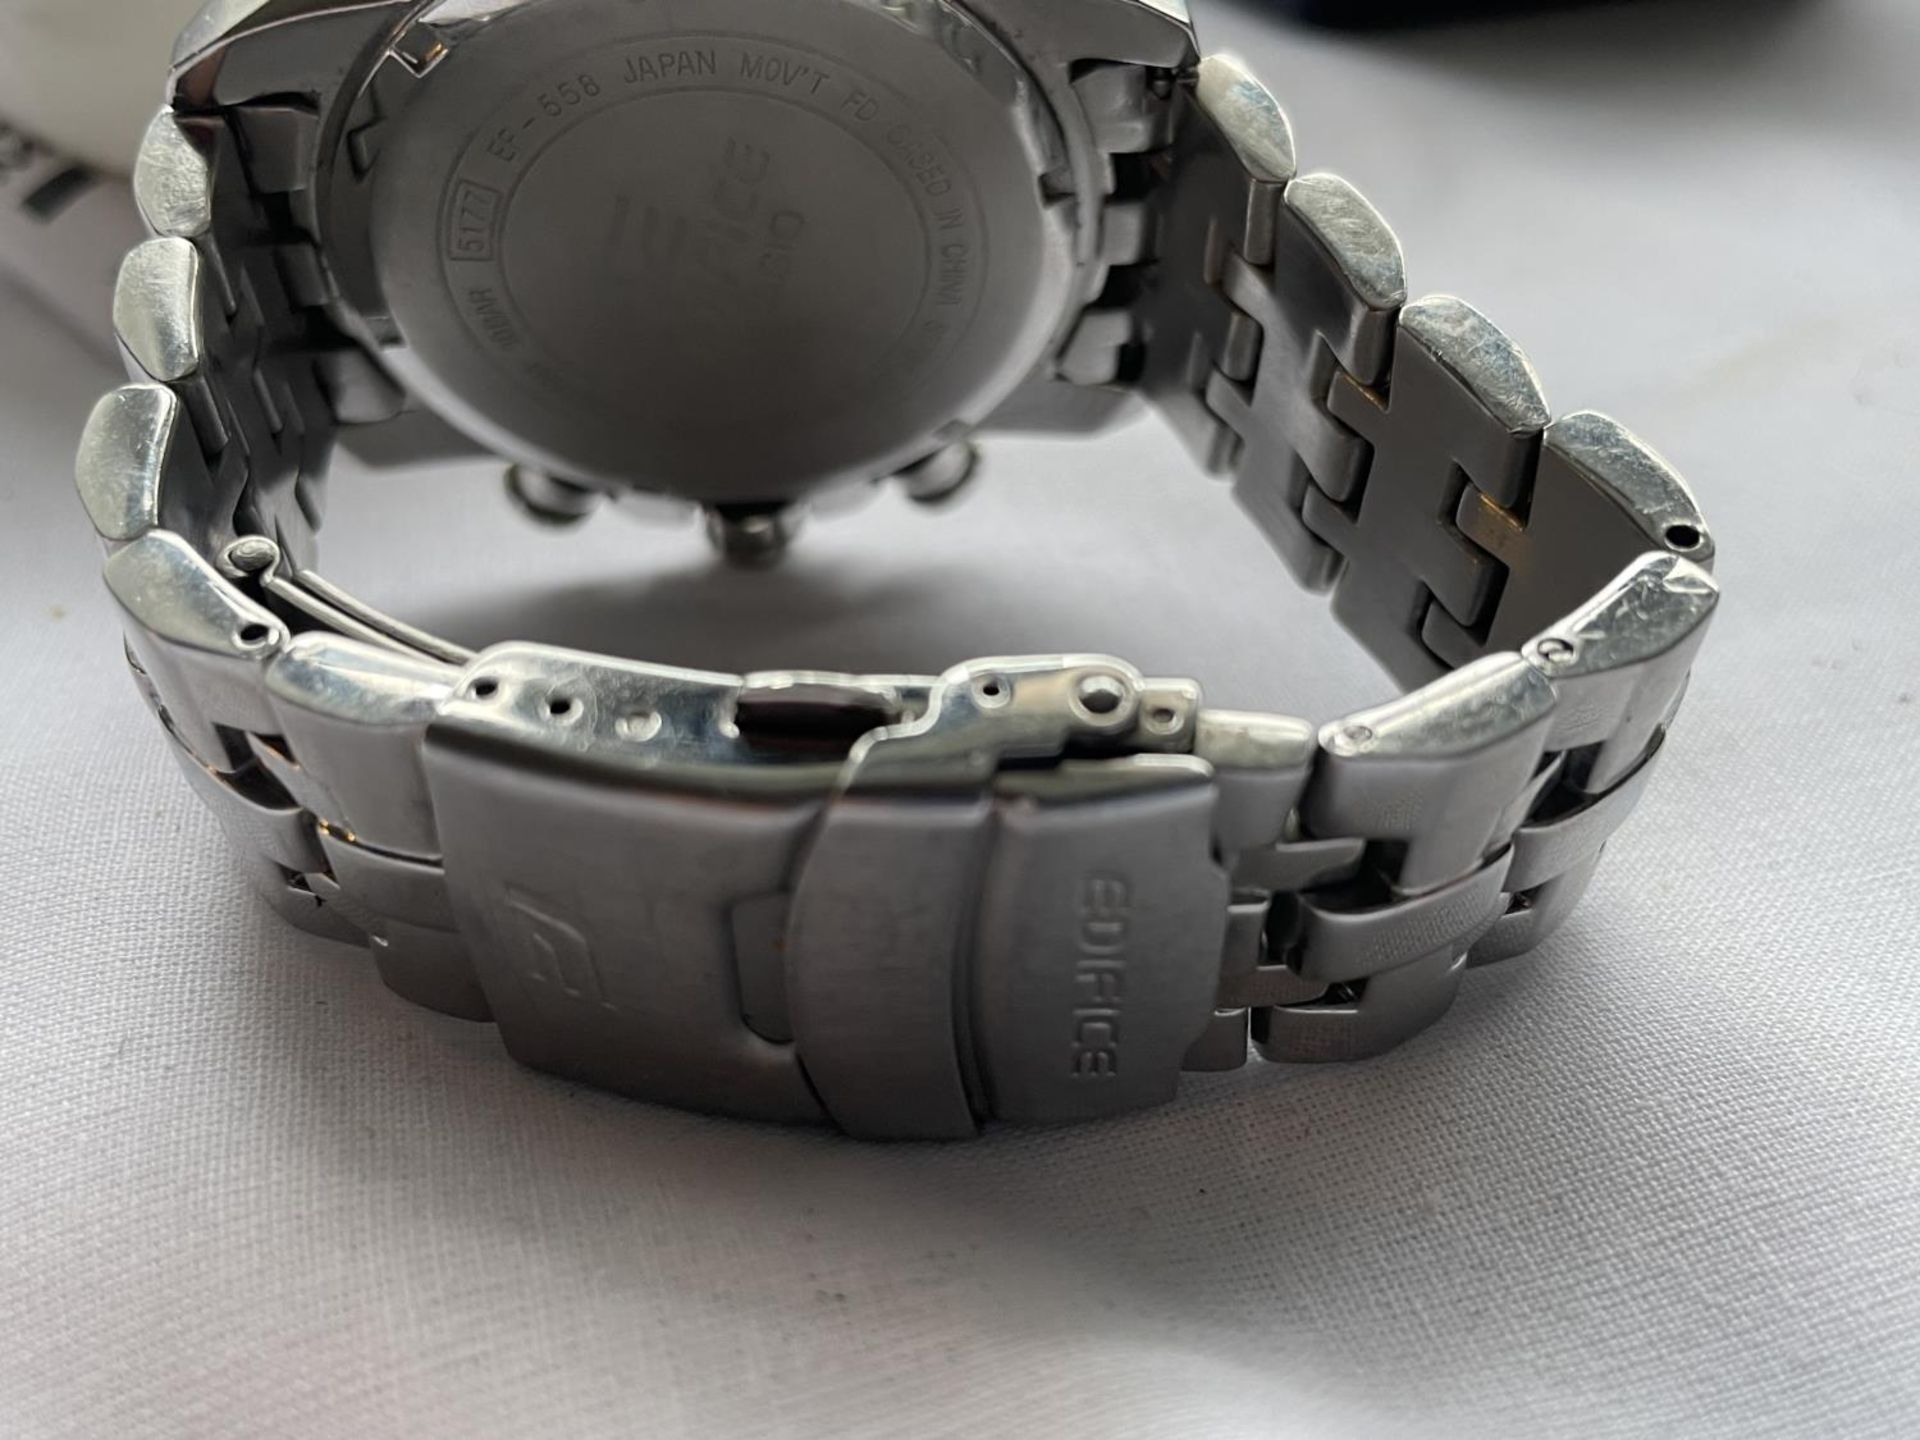 AN AS NEW AND BOXED CASIO EDIFICE WRIST WATCH SEEN WORKING BUT NO WARRANTY - Image 4 of 4